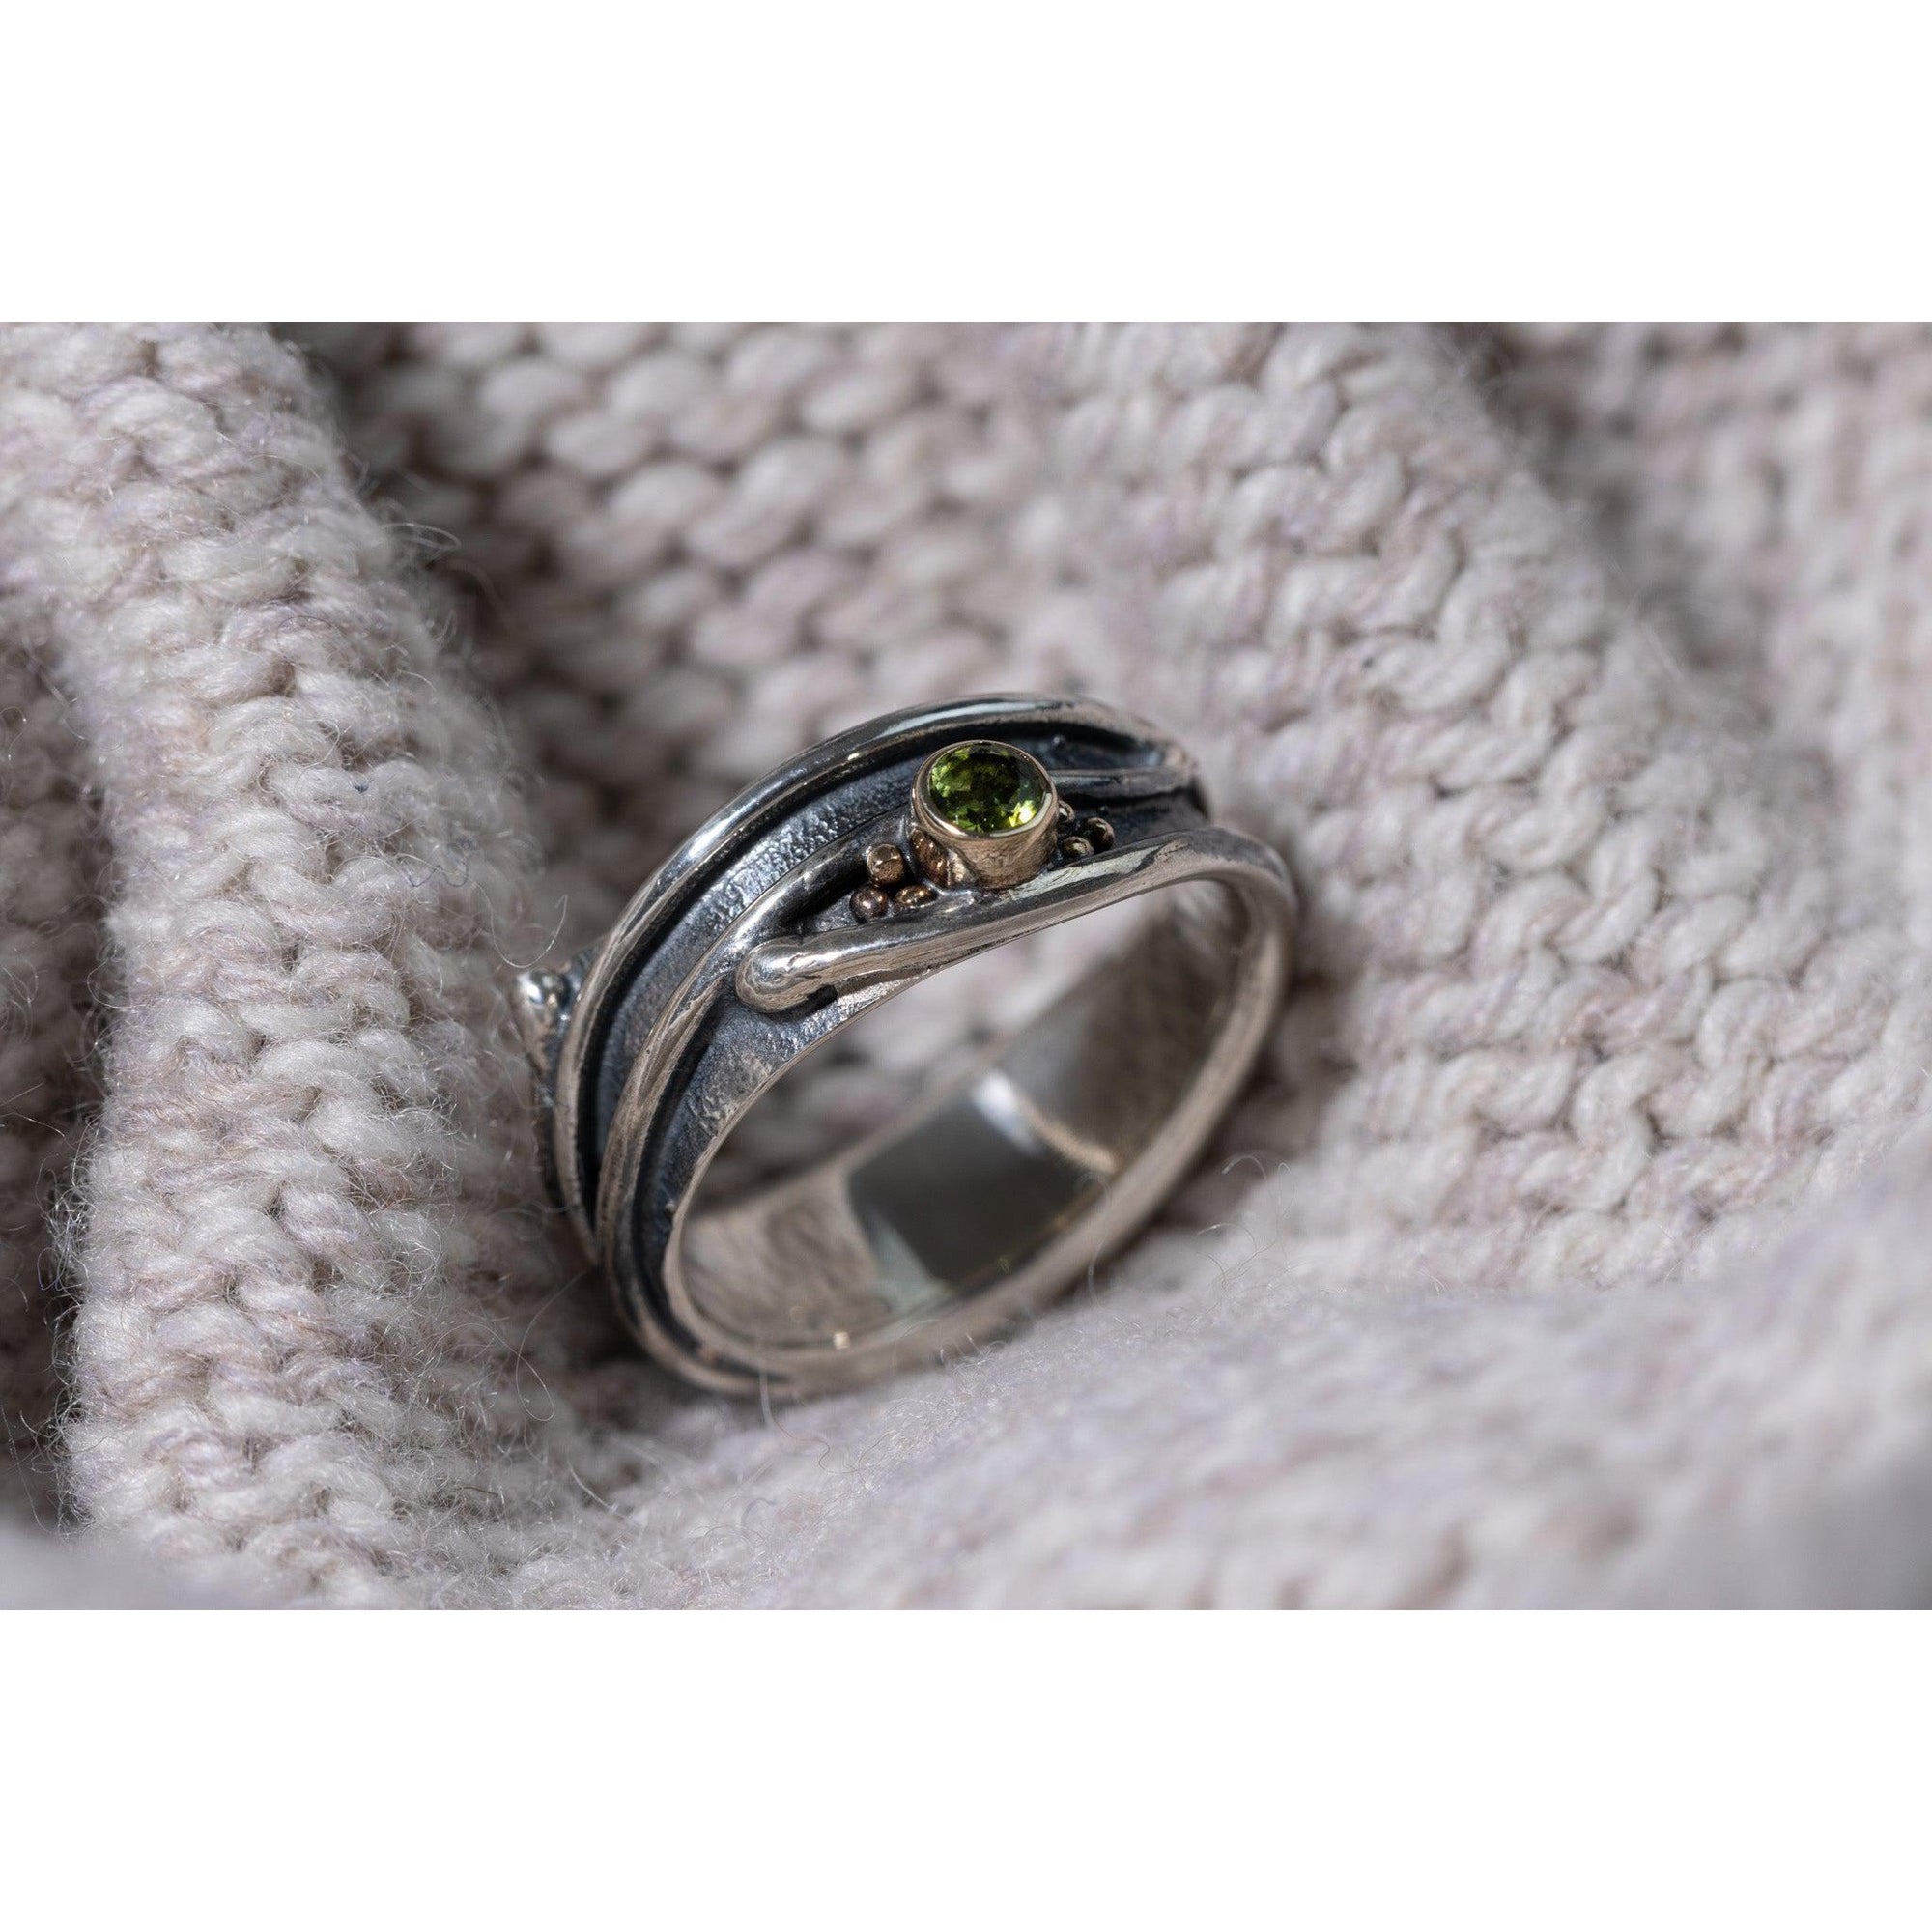 'LG66 - Silver Ring with 9ct Gold 3.5mm Peridot Ring ' by Les Grimshaw, available at Padstow Gallery, Cornwall